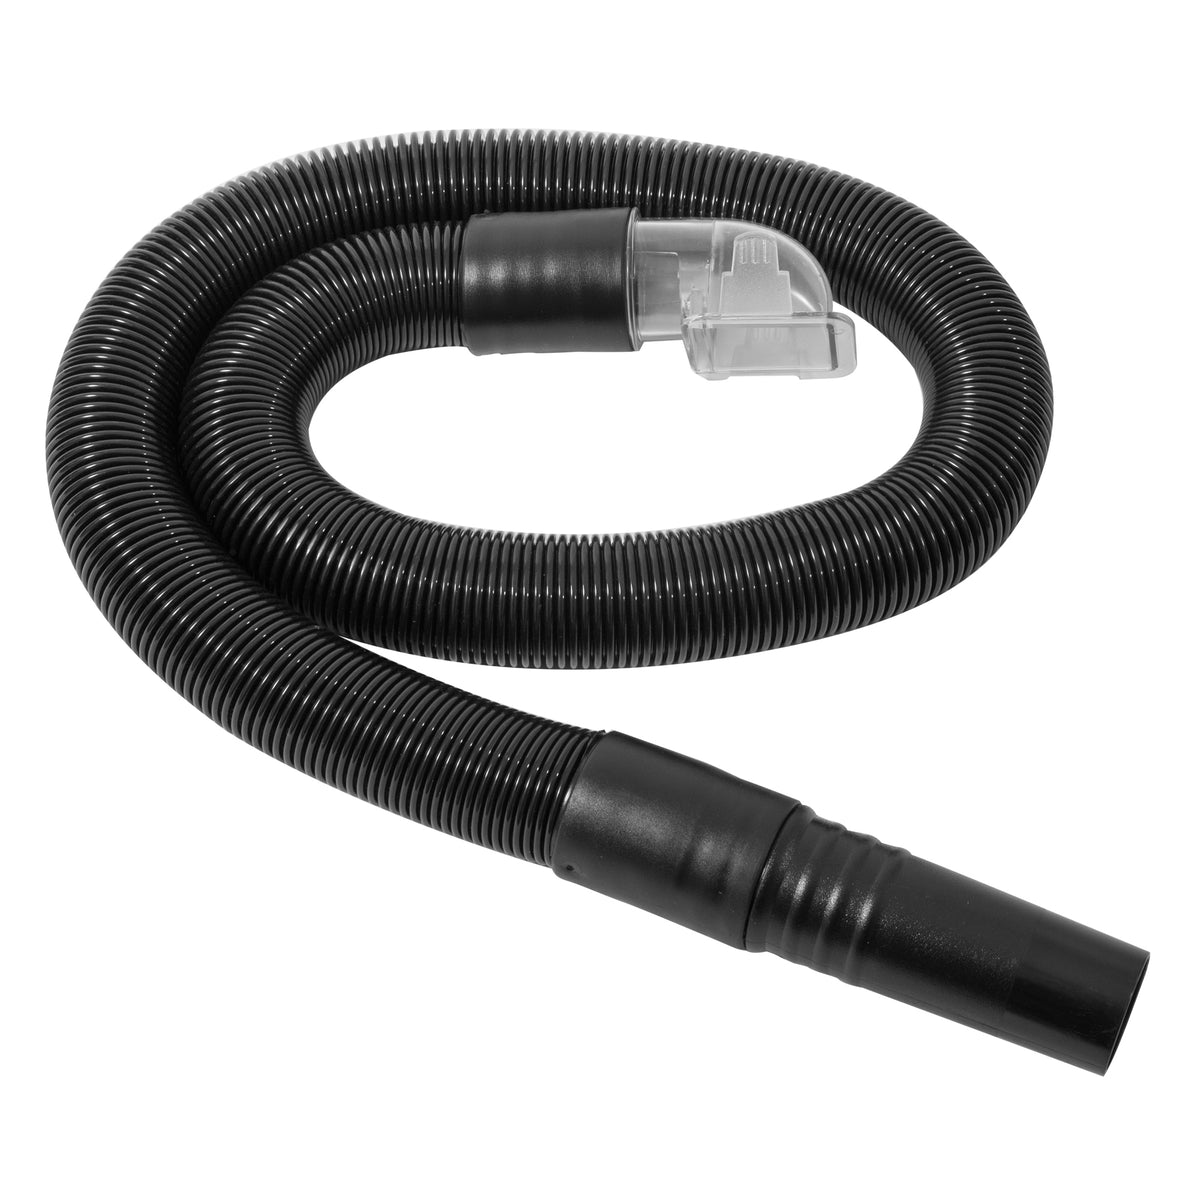 Stretch Hose Assembly Sanitaire Commercial – 618654